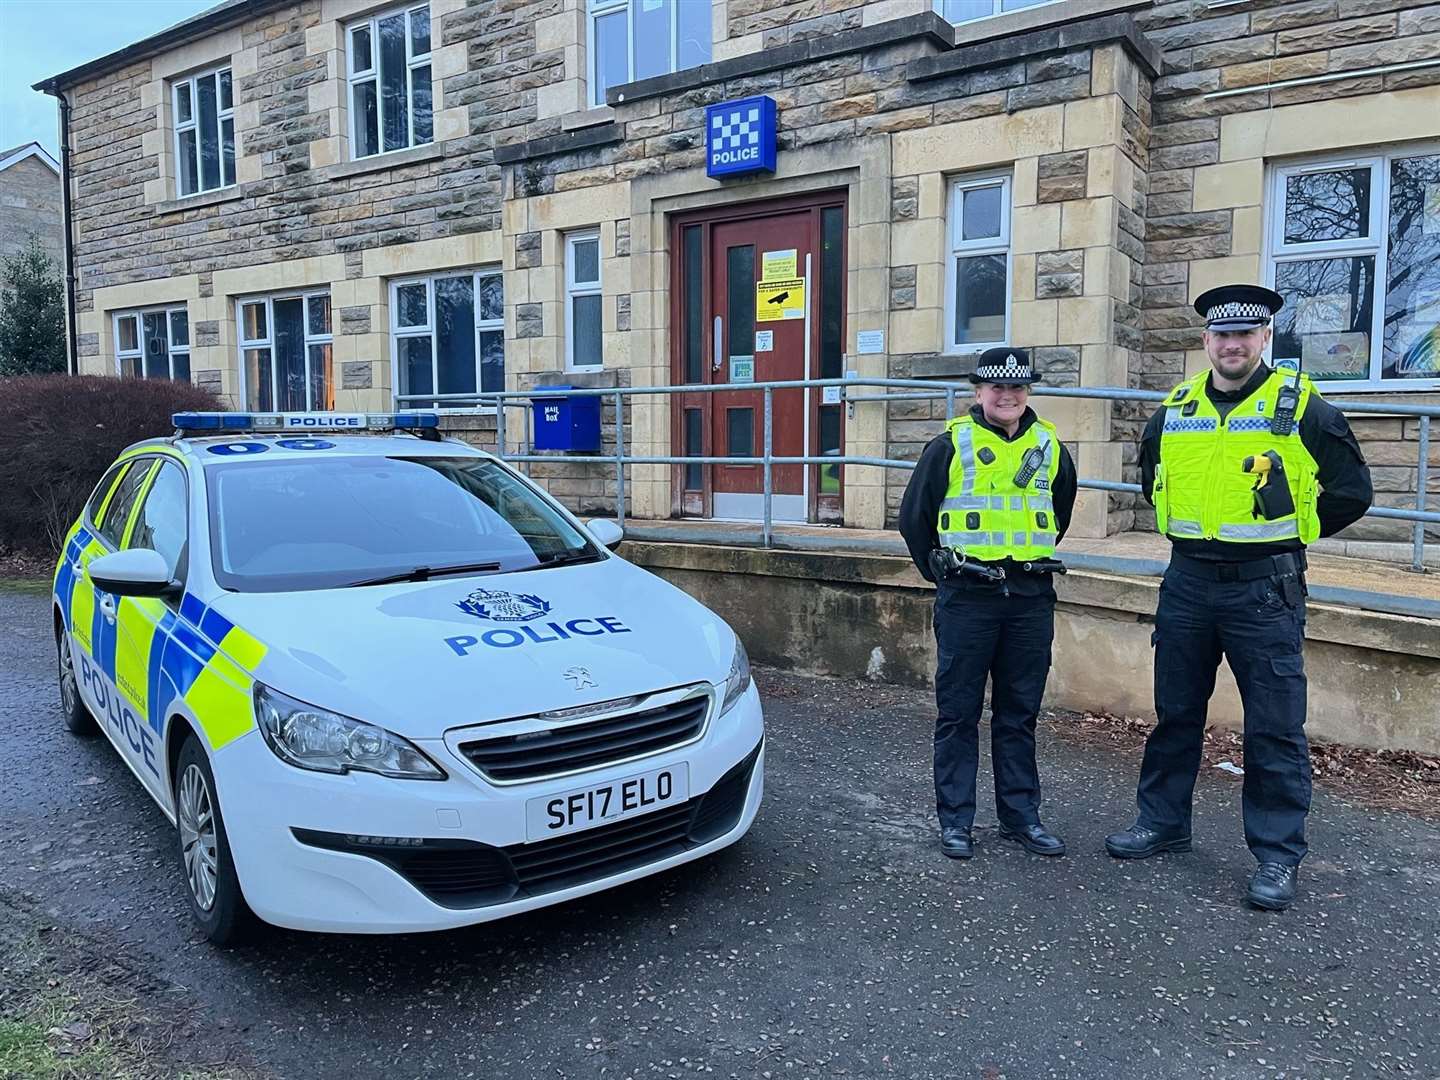 Community officers Yvonne Squair and PC Aaron White at Forres Police Station on Victoria Road.